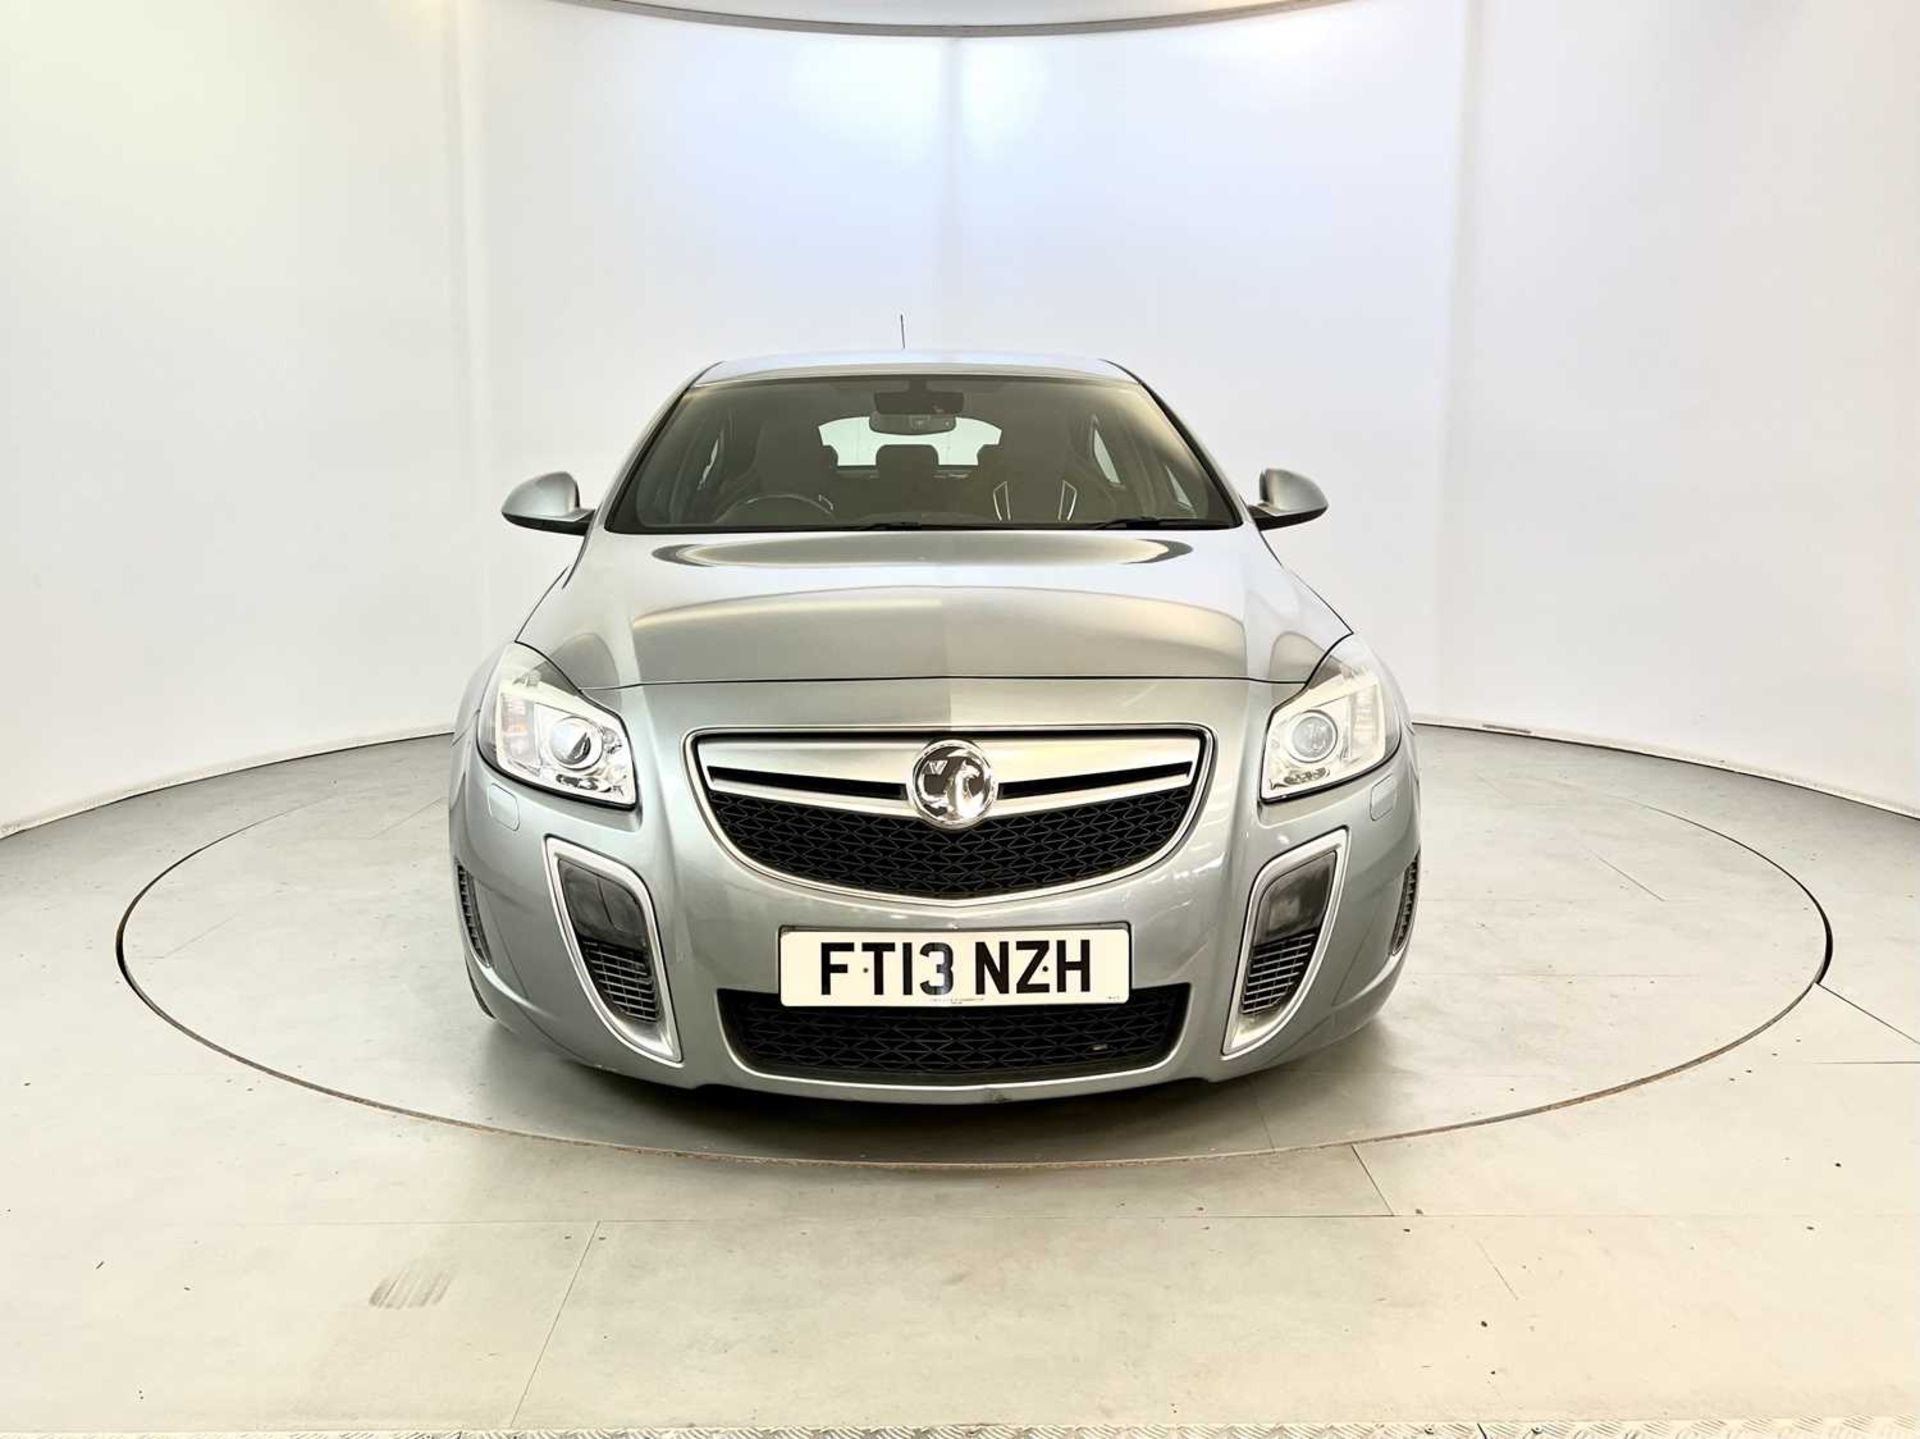 2013 Vauxhall Insignia VXR Supersport - Image 2 of 35